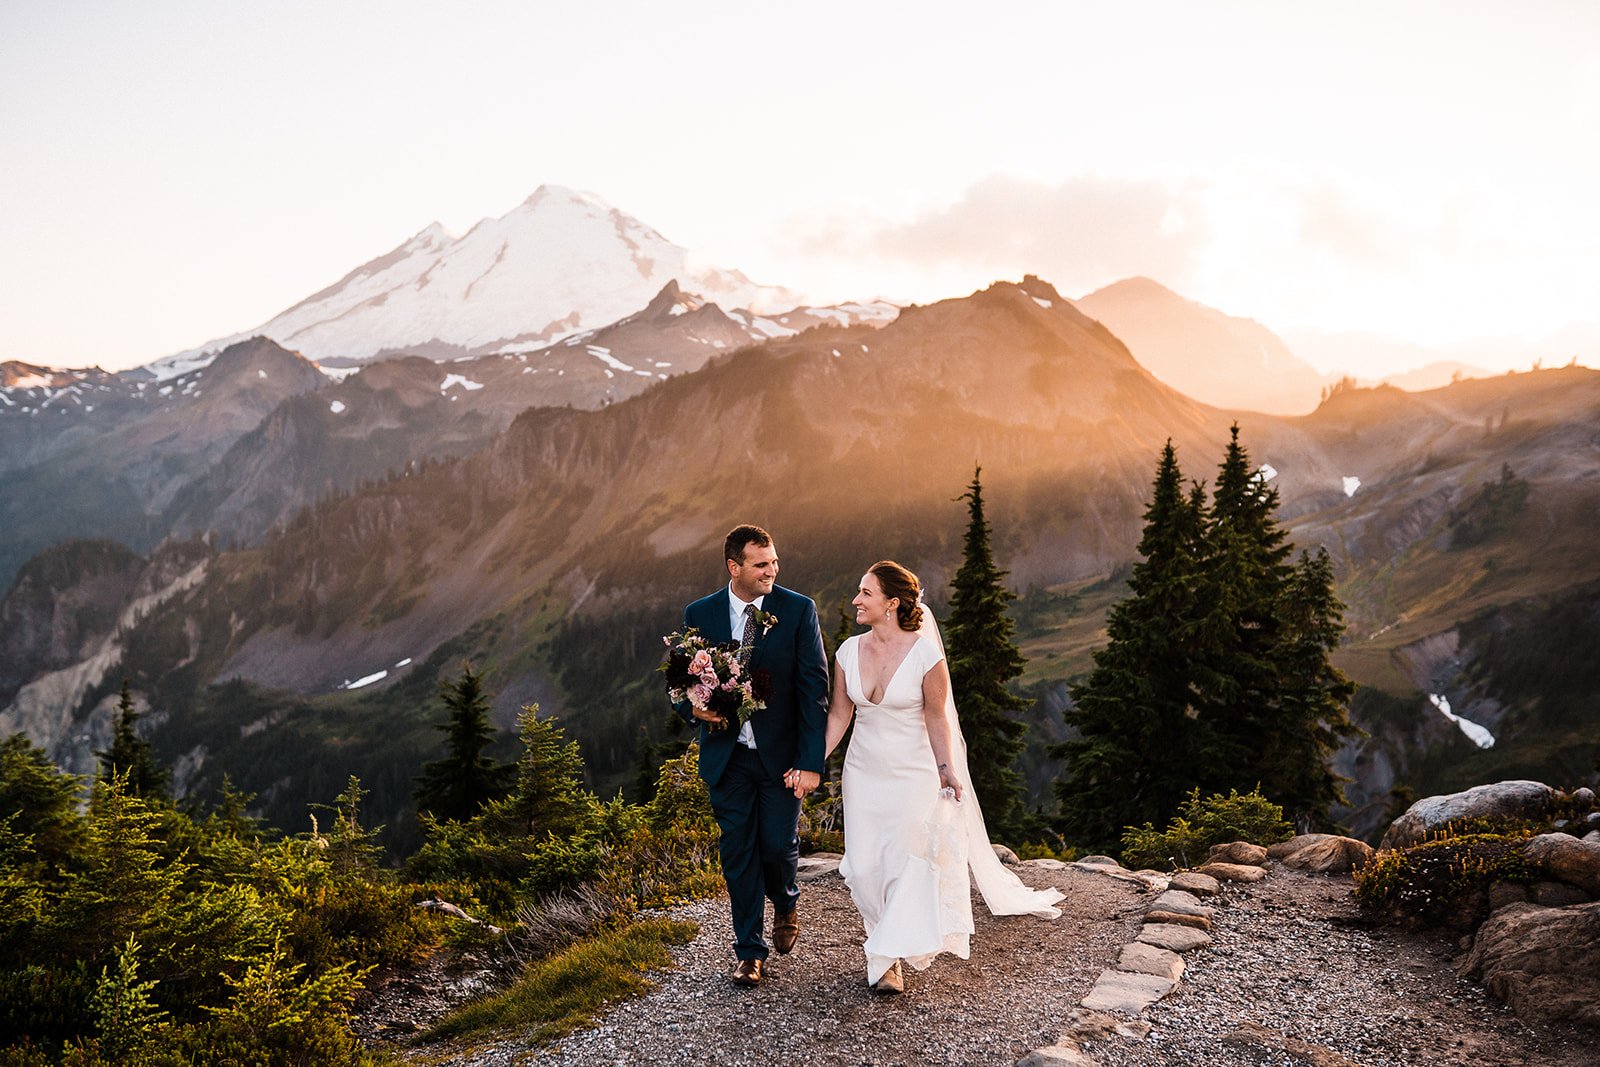 Emily_Ian_North_Cascades_Elopement_The_Foxes_Photography_348.jpg